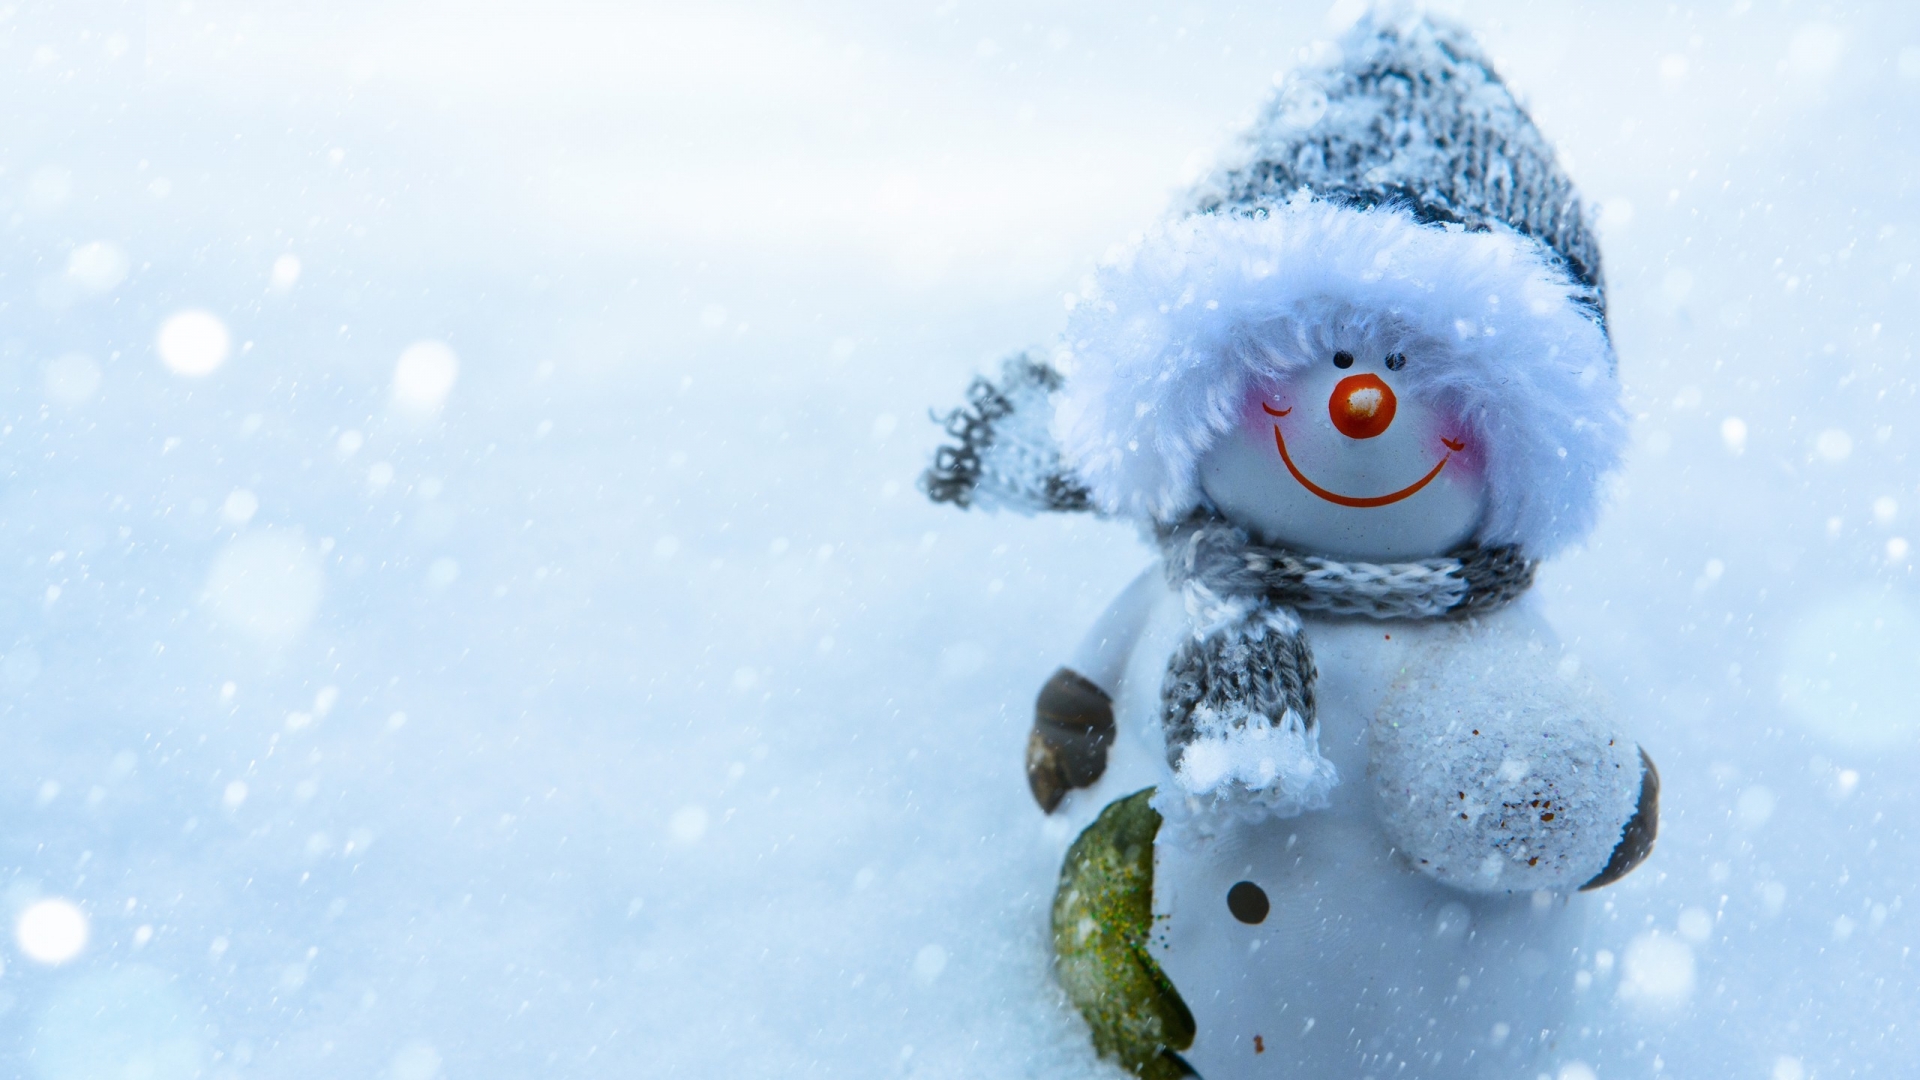 Snowman Smiling for 1920 x 1080 HDTV 1080p resolution